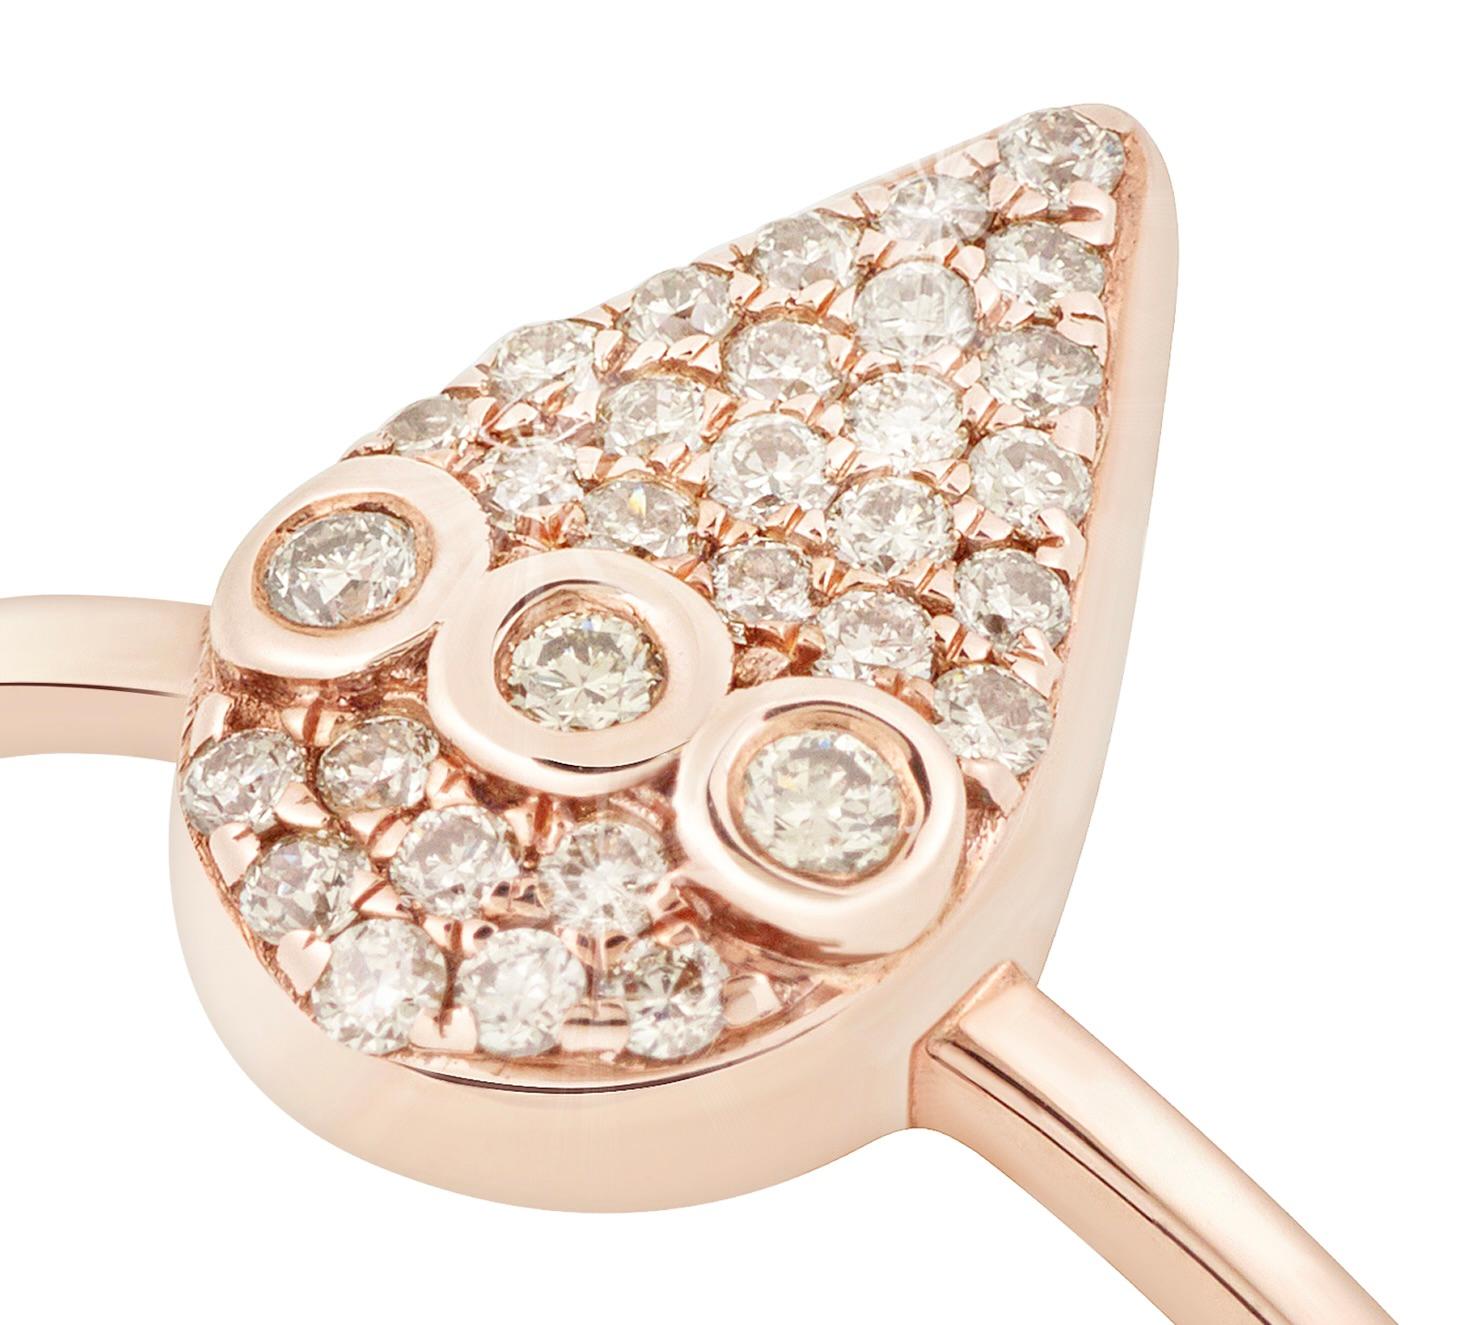 This stunning, flat-drop ring in shimmering 18k rose gold evokes the wonder of nature as it glistens like a water droplet, pristine and pure in the morning's soft embrace. Its pavé-style arrangement of champagne diamonds is crafted with meticulous